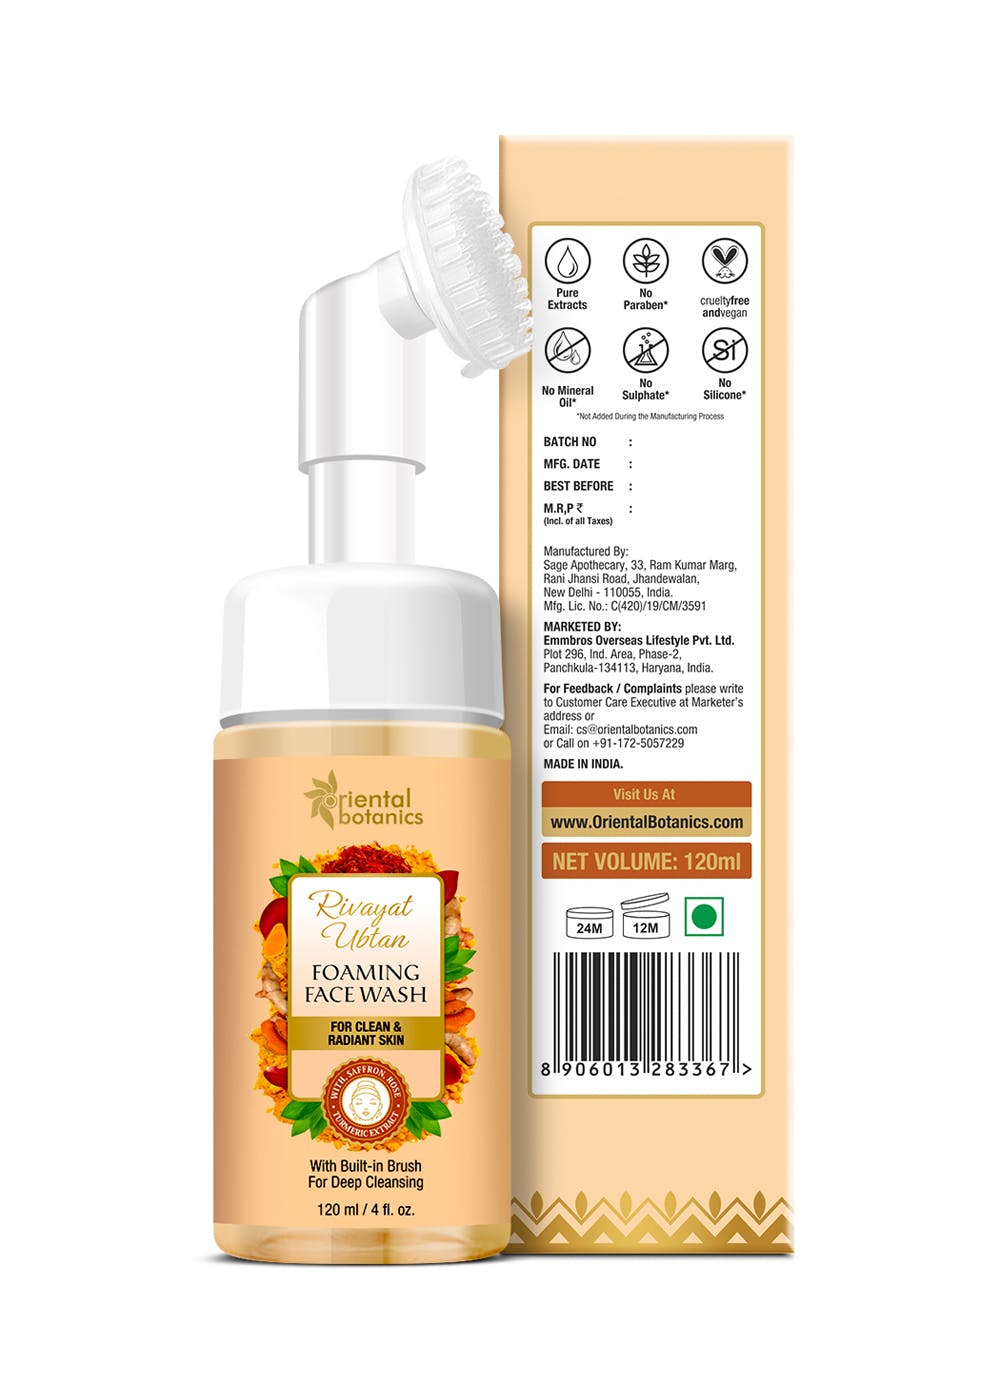 Get Rivayat Ubtan Foaming Face Wash With Saffron, Rose And Turmeric Extract  - 120 ml at ₹ 499 | LBB Shop